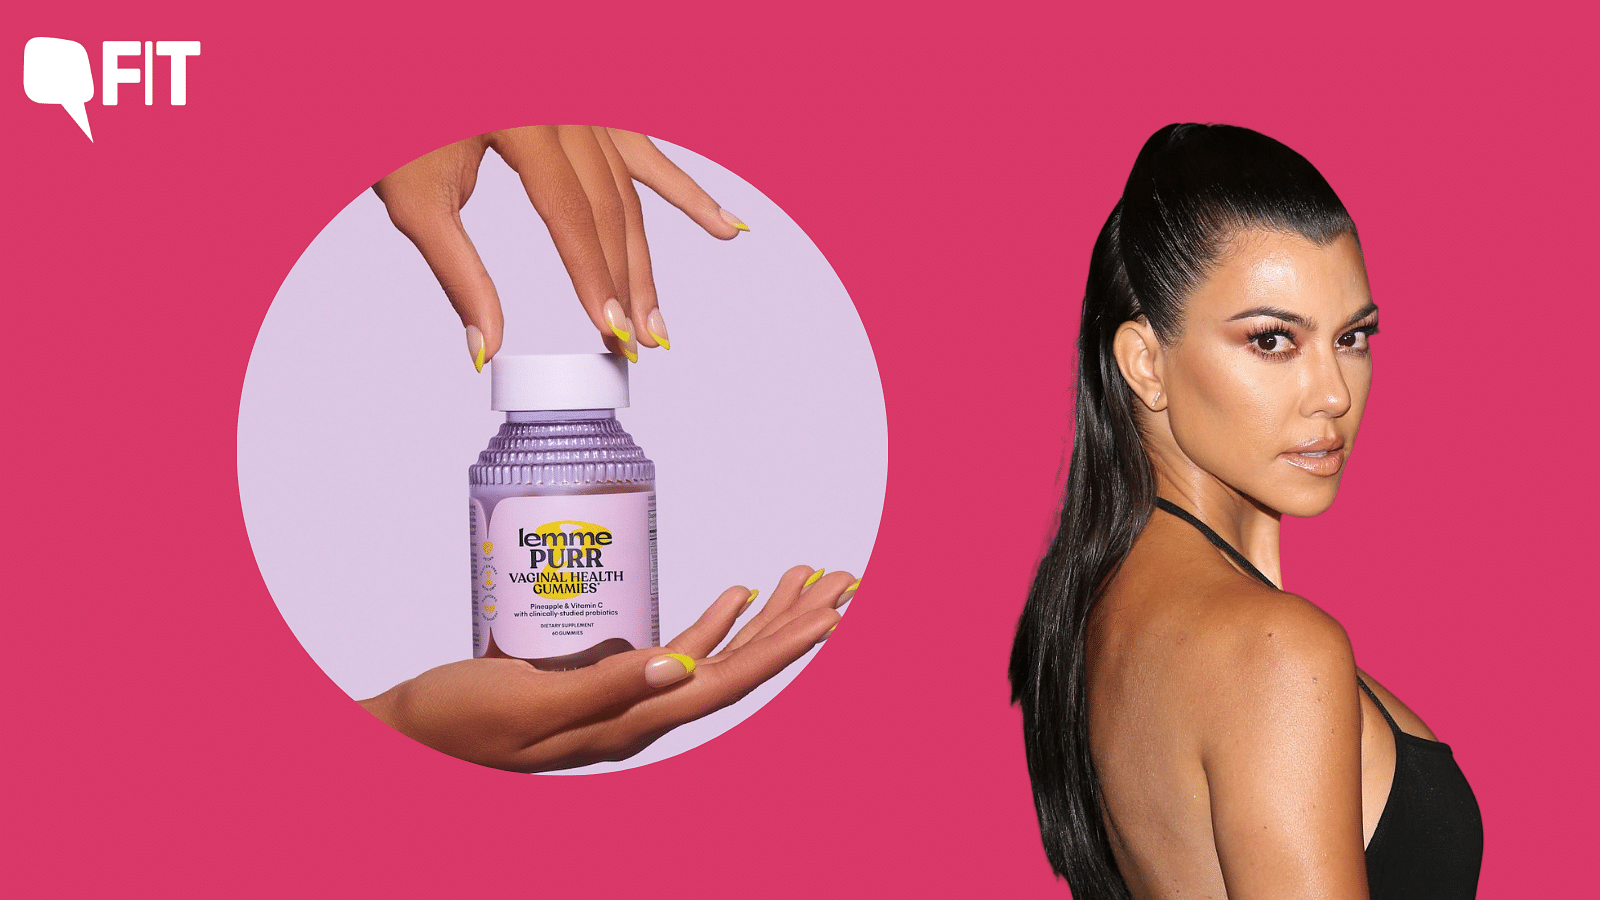 <div class="paragraphs"><p>American celebrity Kourtney Kardashian’s “vaginal wellness” range, which claims to “boost” your vagina’s health, is being called out by experts.</p></div>